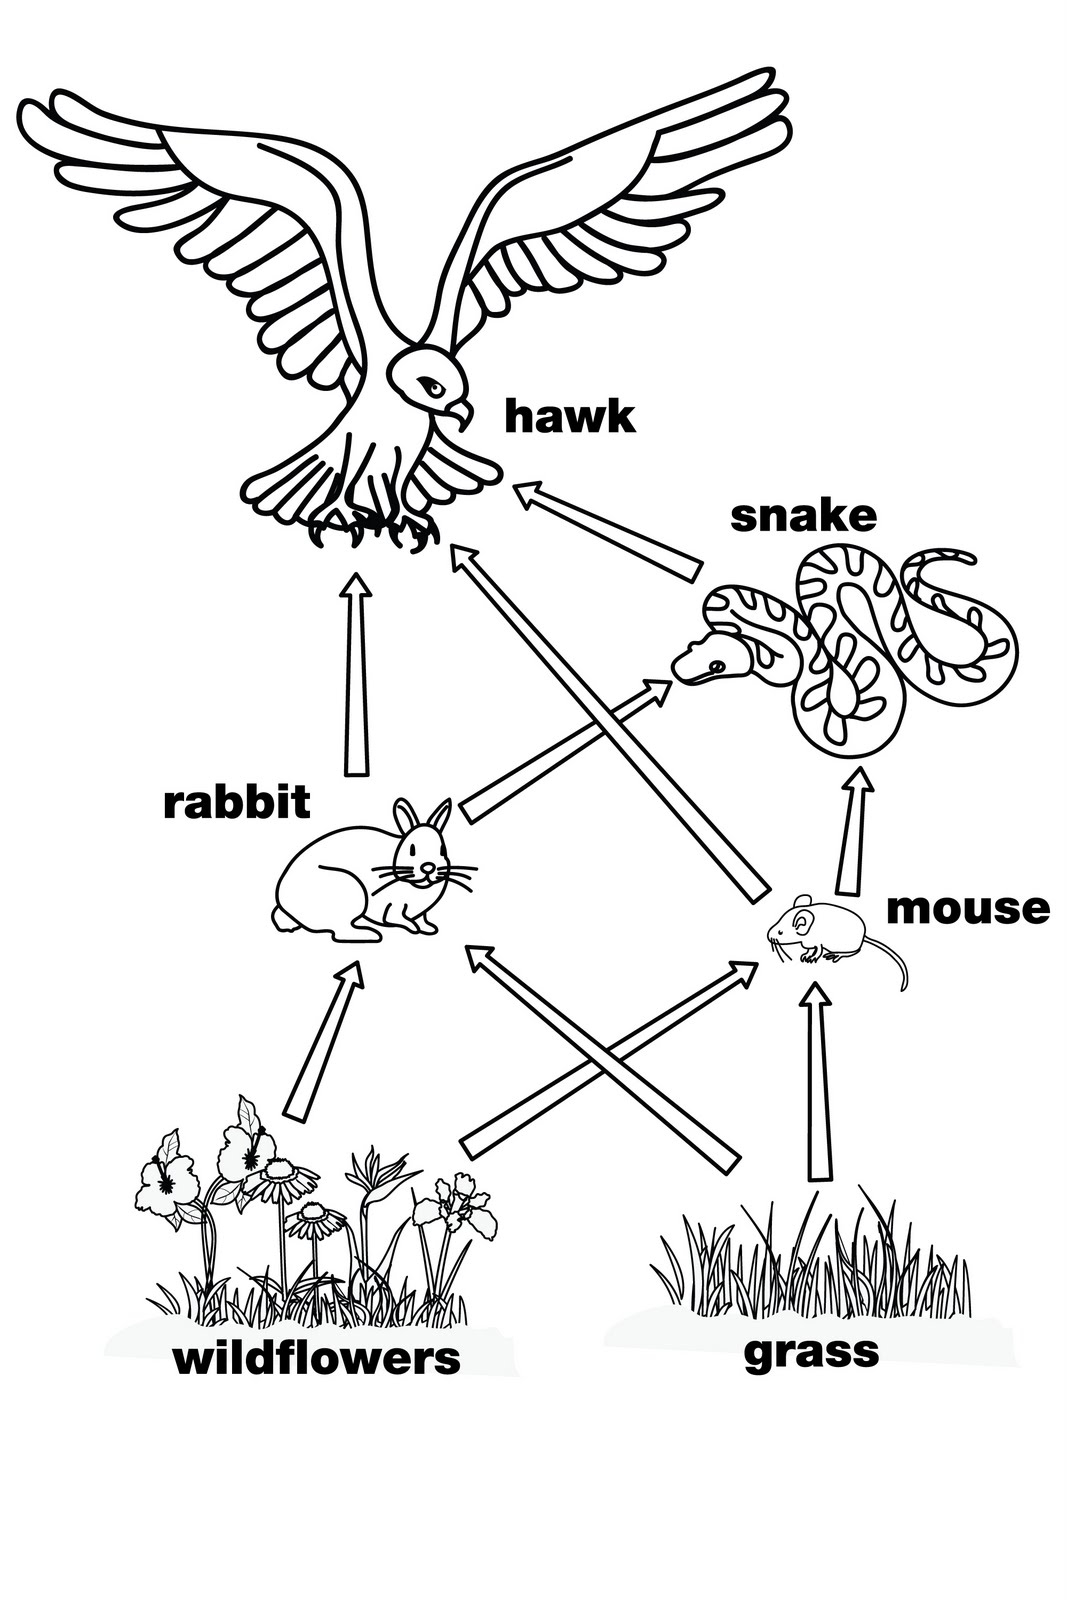 food chain coloring page - Clip Art Library With Regard To Blank Food Web Template